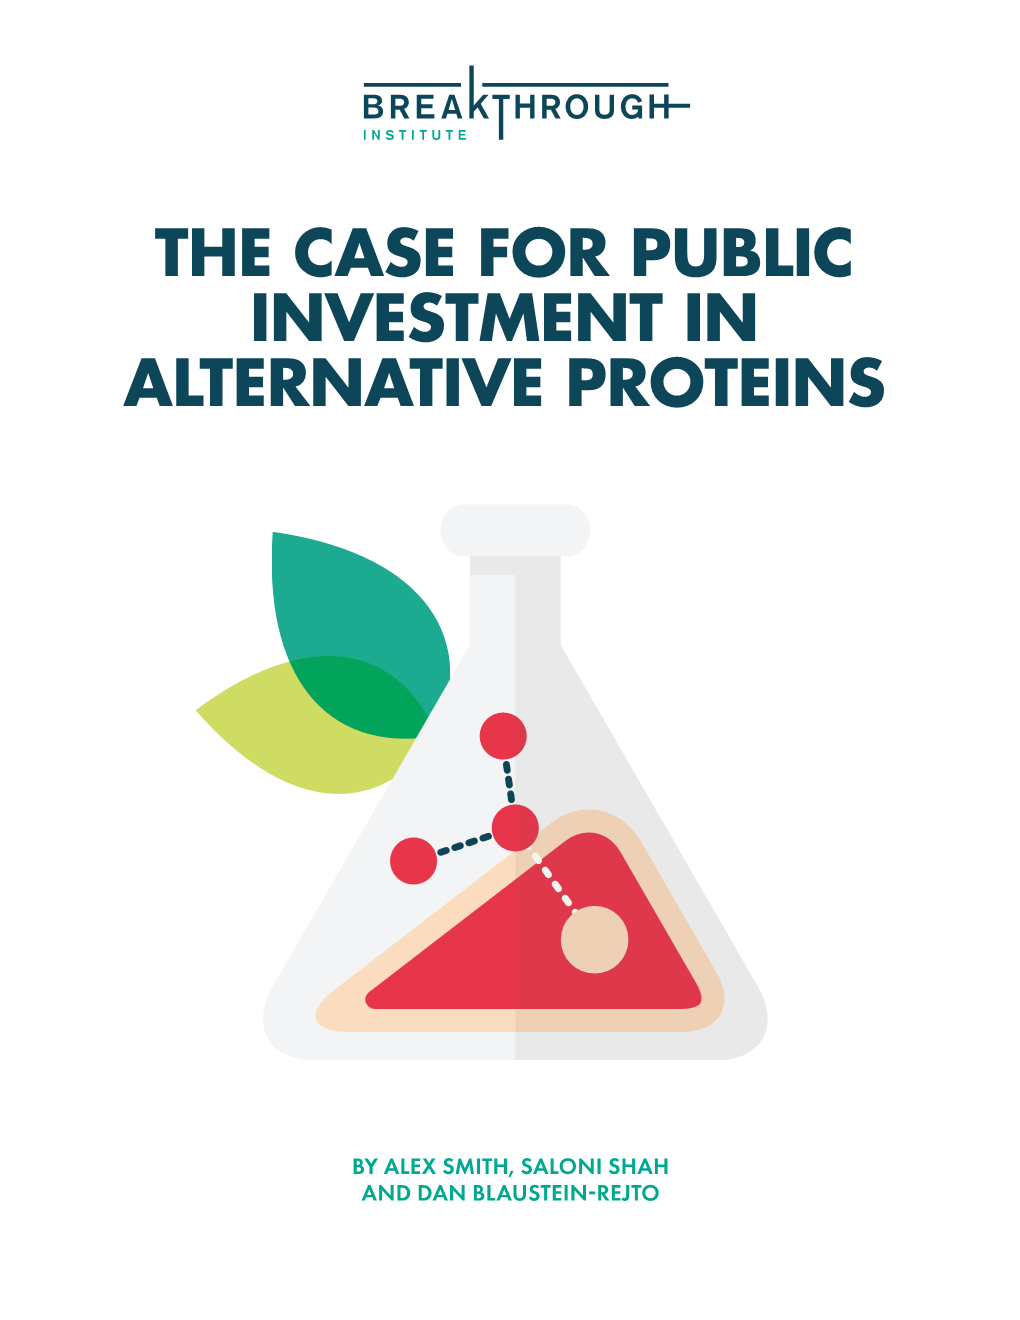 The Case for Public Investment in Alternative Proteins